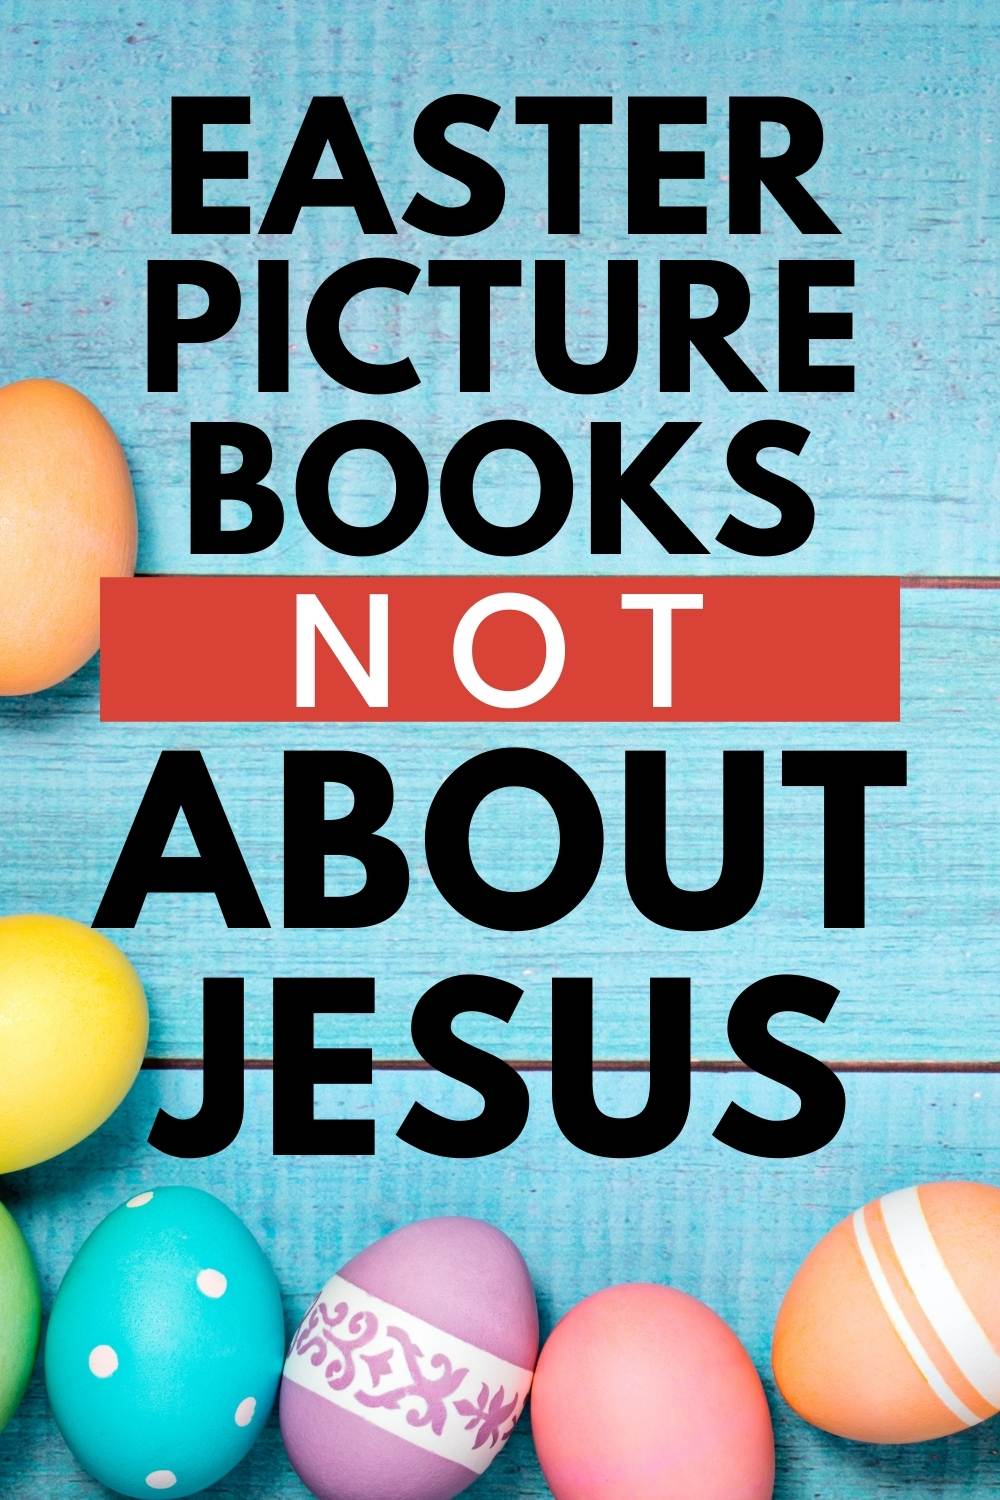 pin for Easter picture books not about Jesus